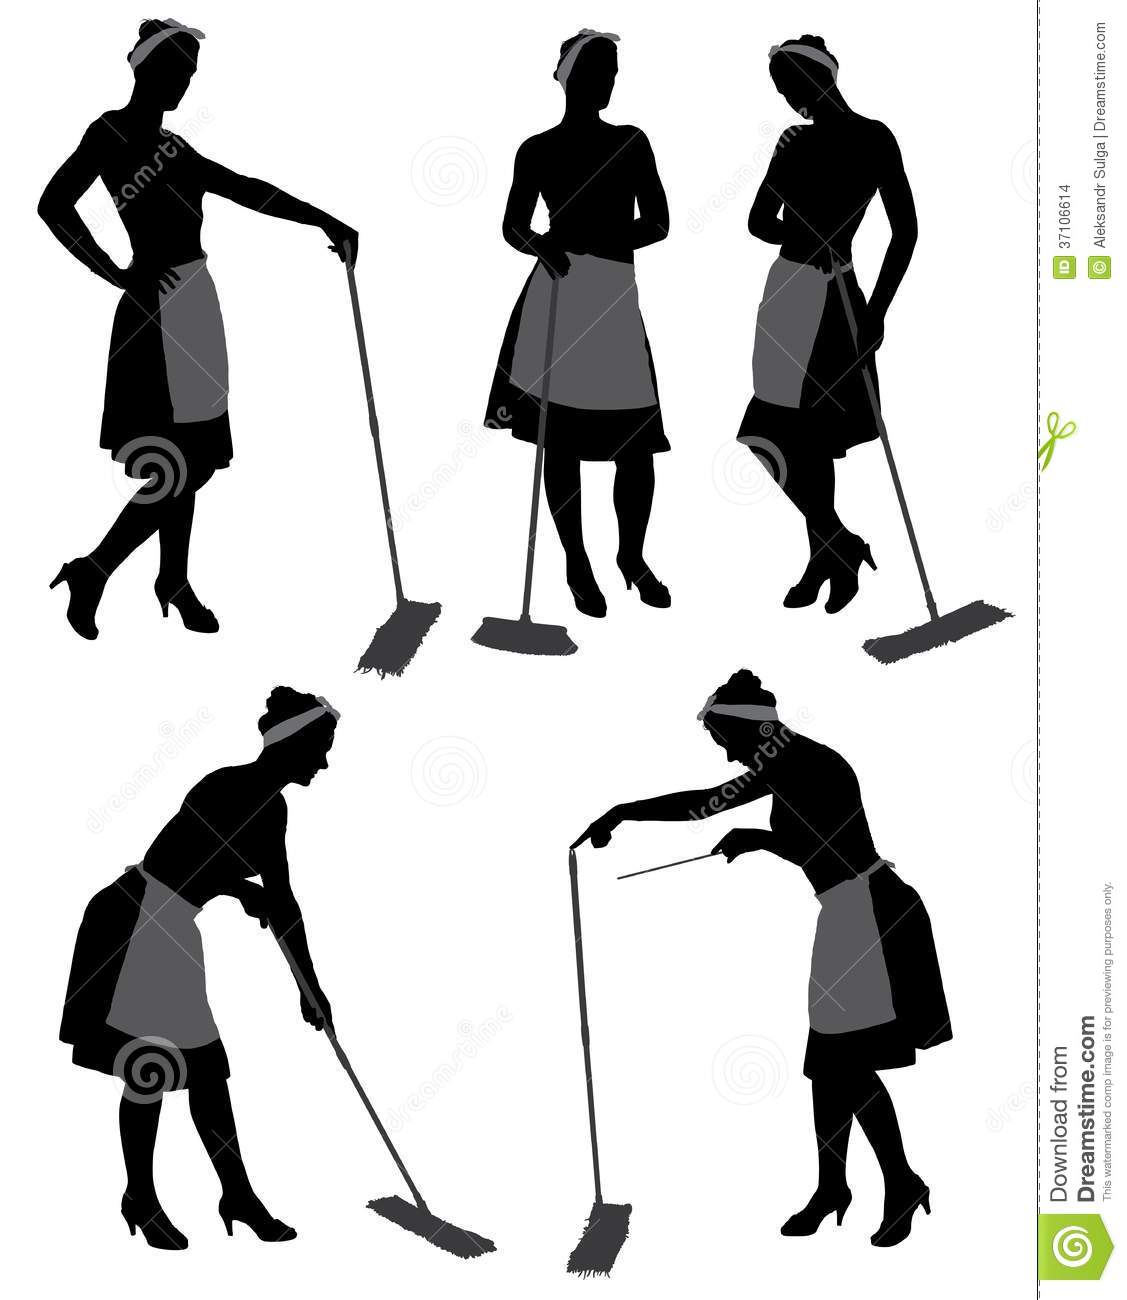 Adult Cleaner Maid Woman Silhouette With Mop And Uniform Cleaning